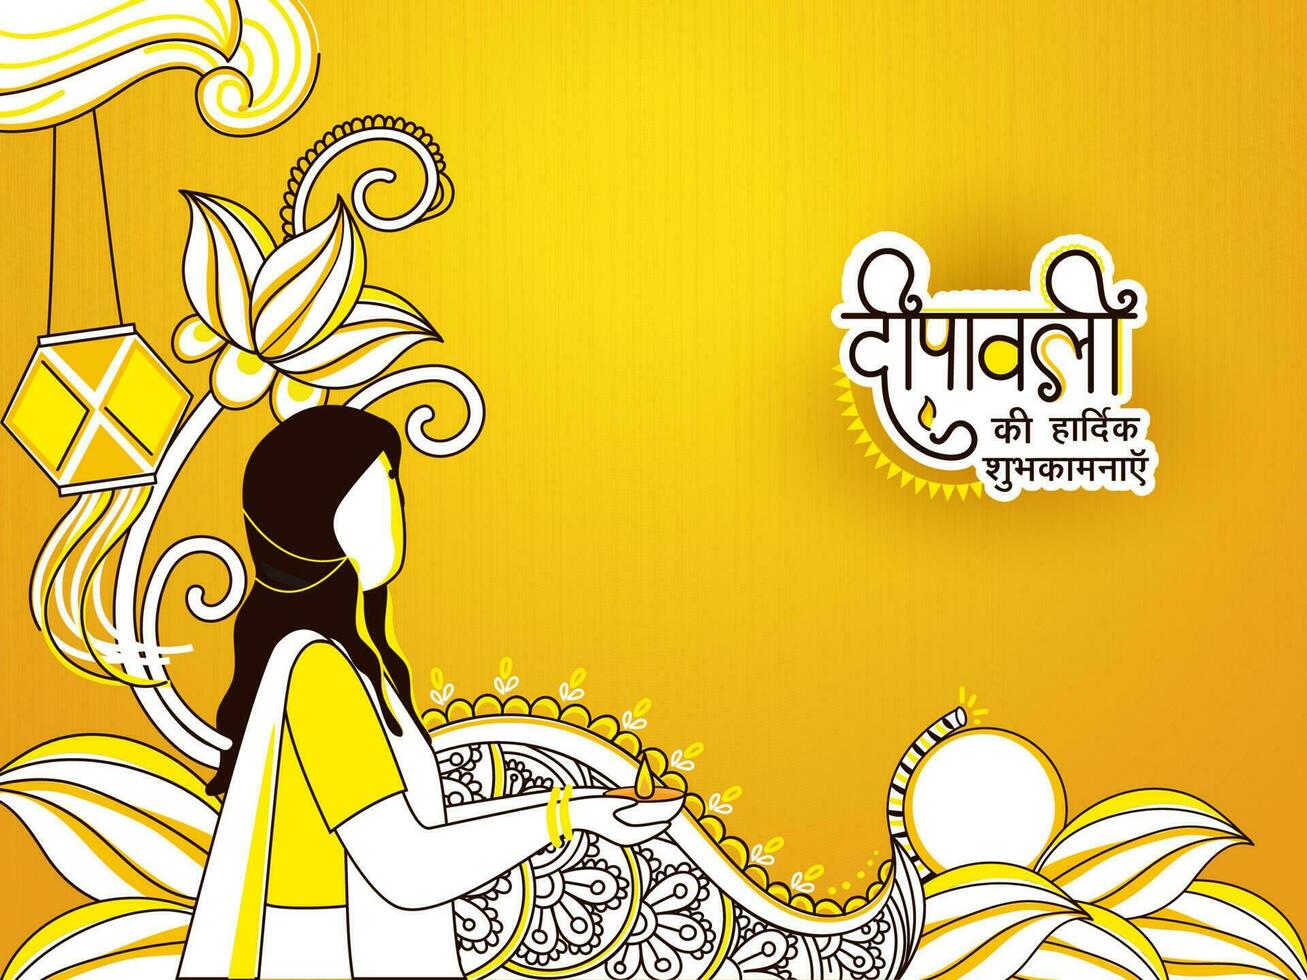 Sticker Style Happy Diwali Wishes In Hindi Language With Faceless Woman Holding Lit Oil Lamp And Floral Motif On Yellow Background. vector